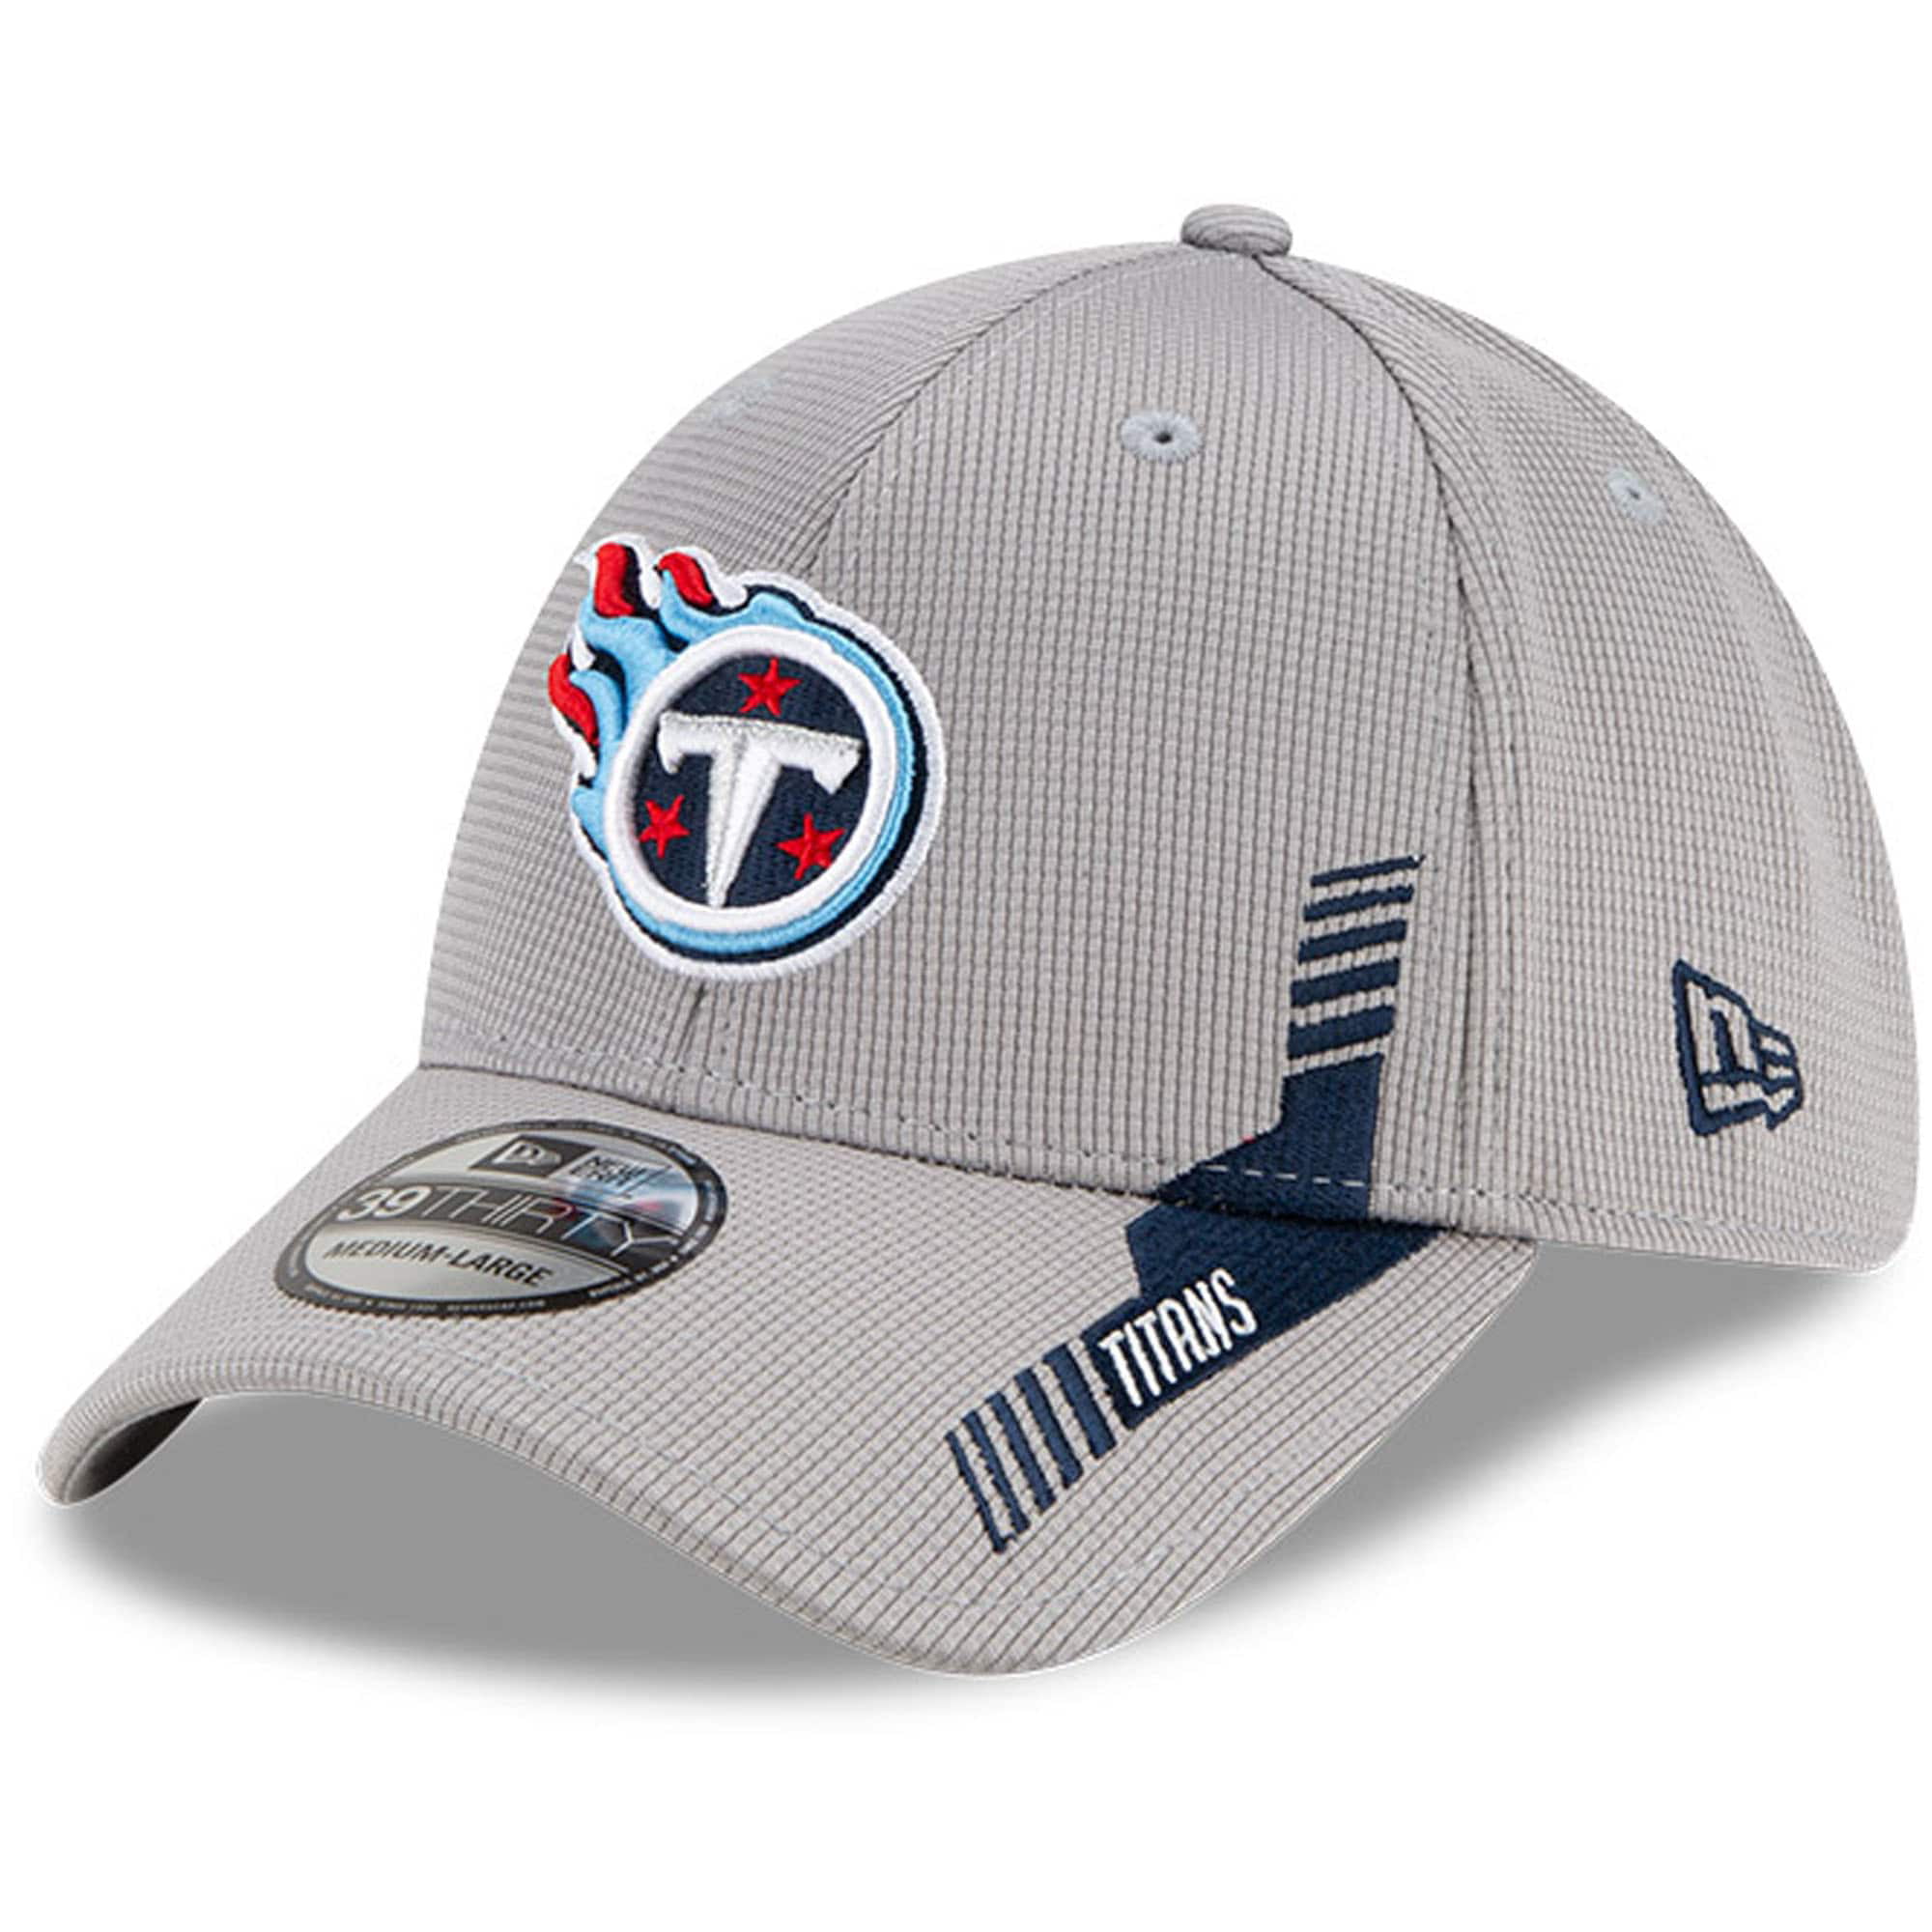 New Era 39THIRTY Cap Onfield 19 Salute to Service Tennessee Titans 